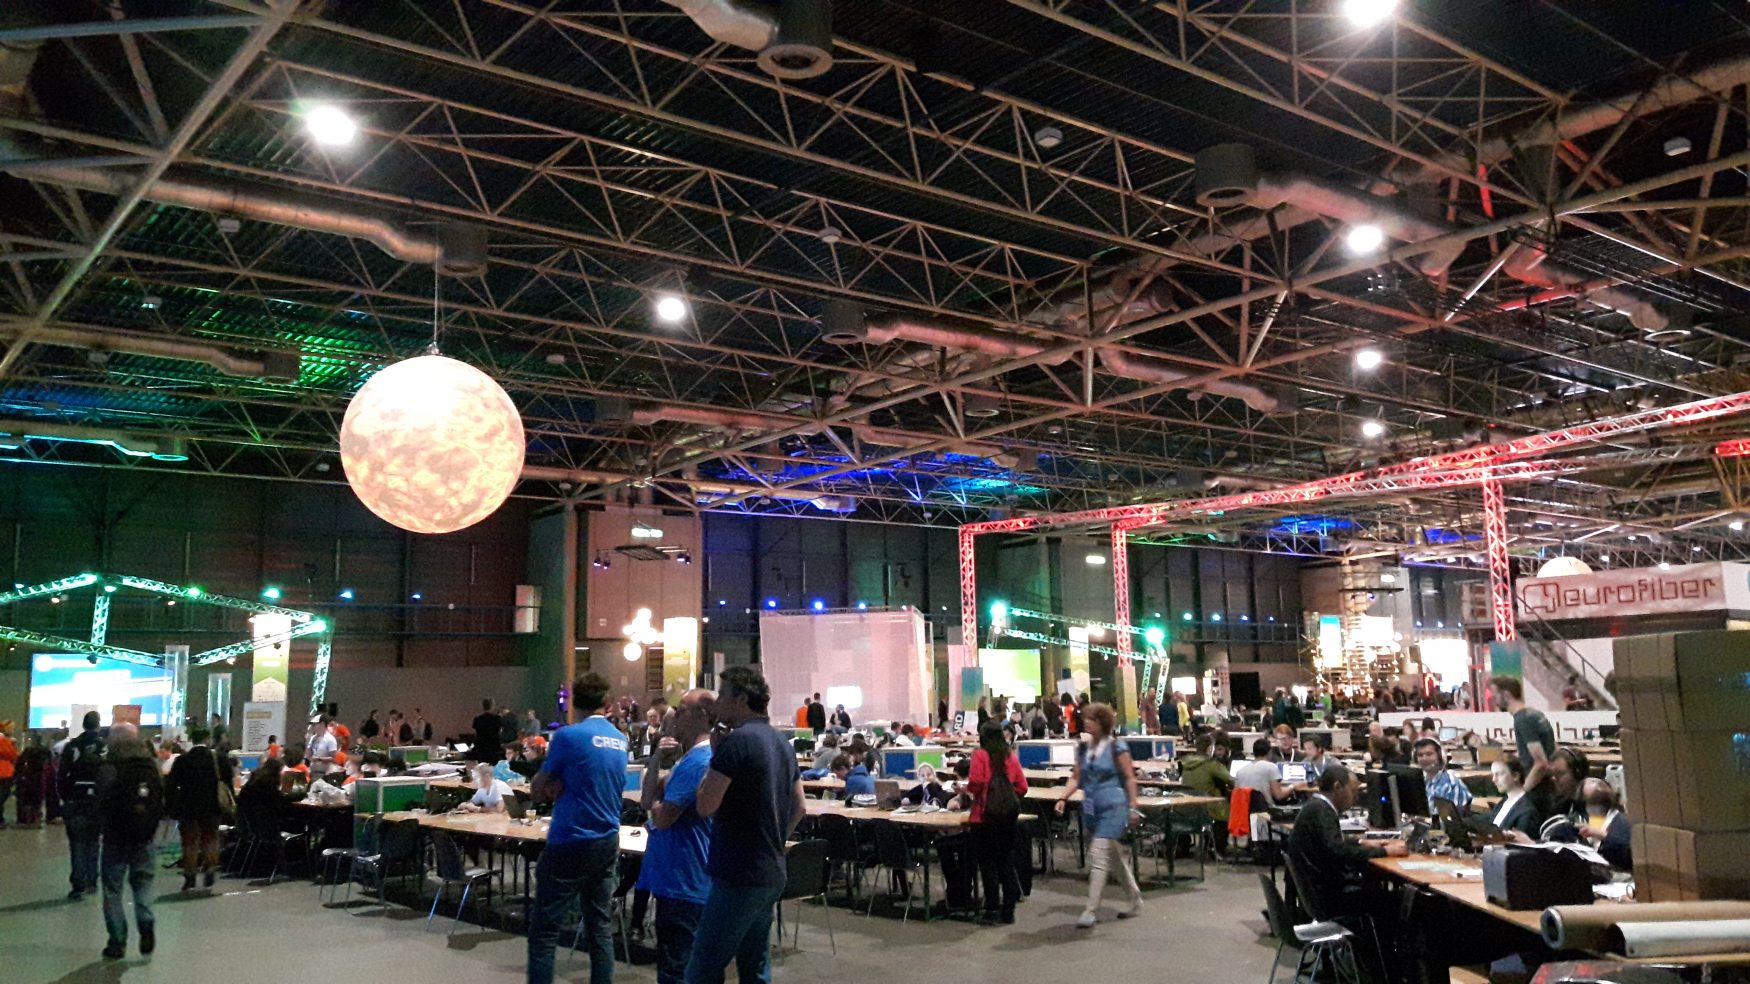 Campus Party: mixed feelings for startup founders